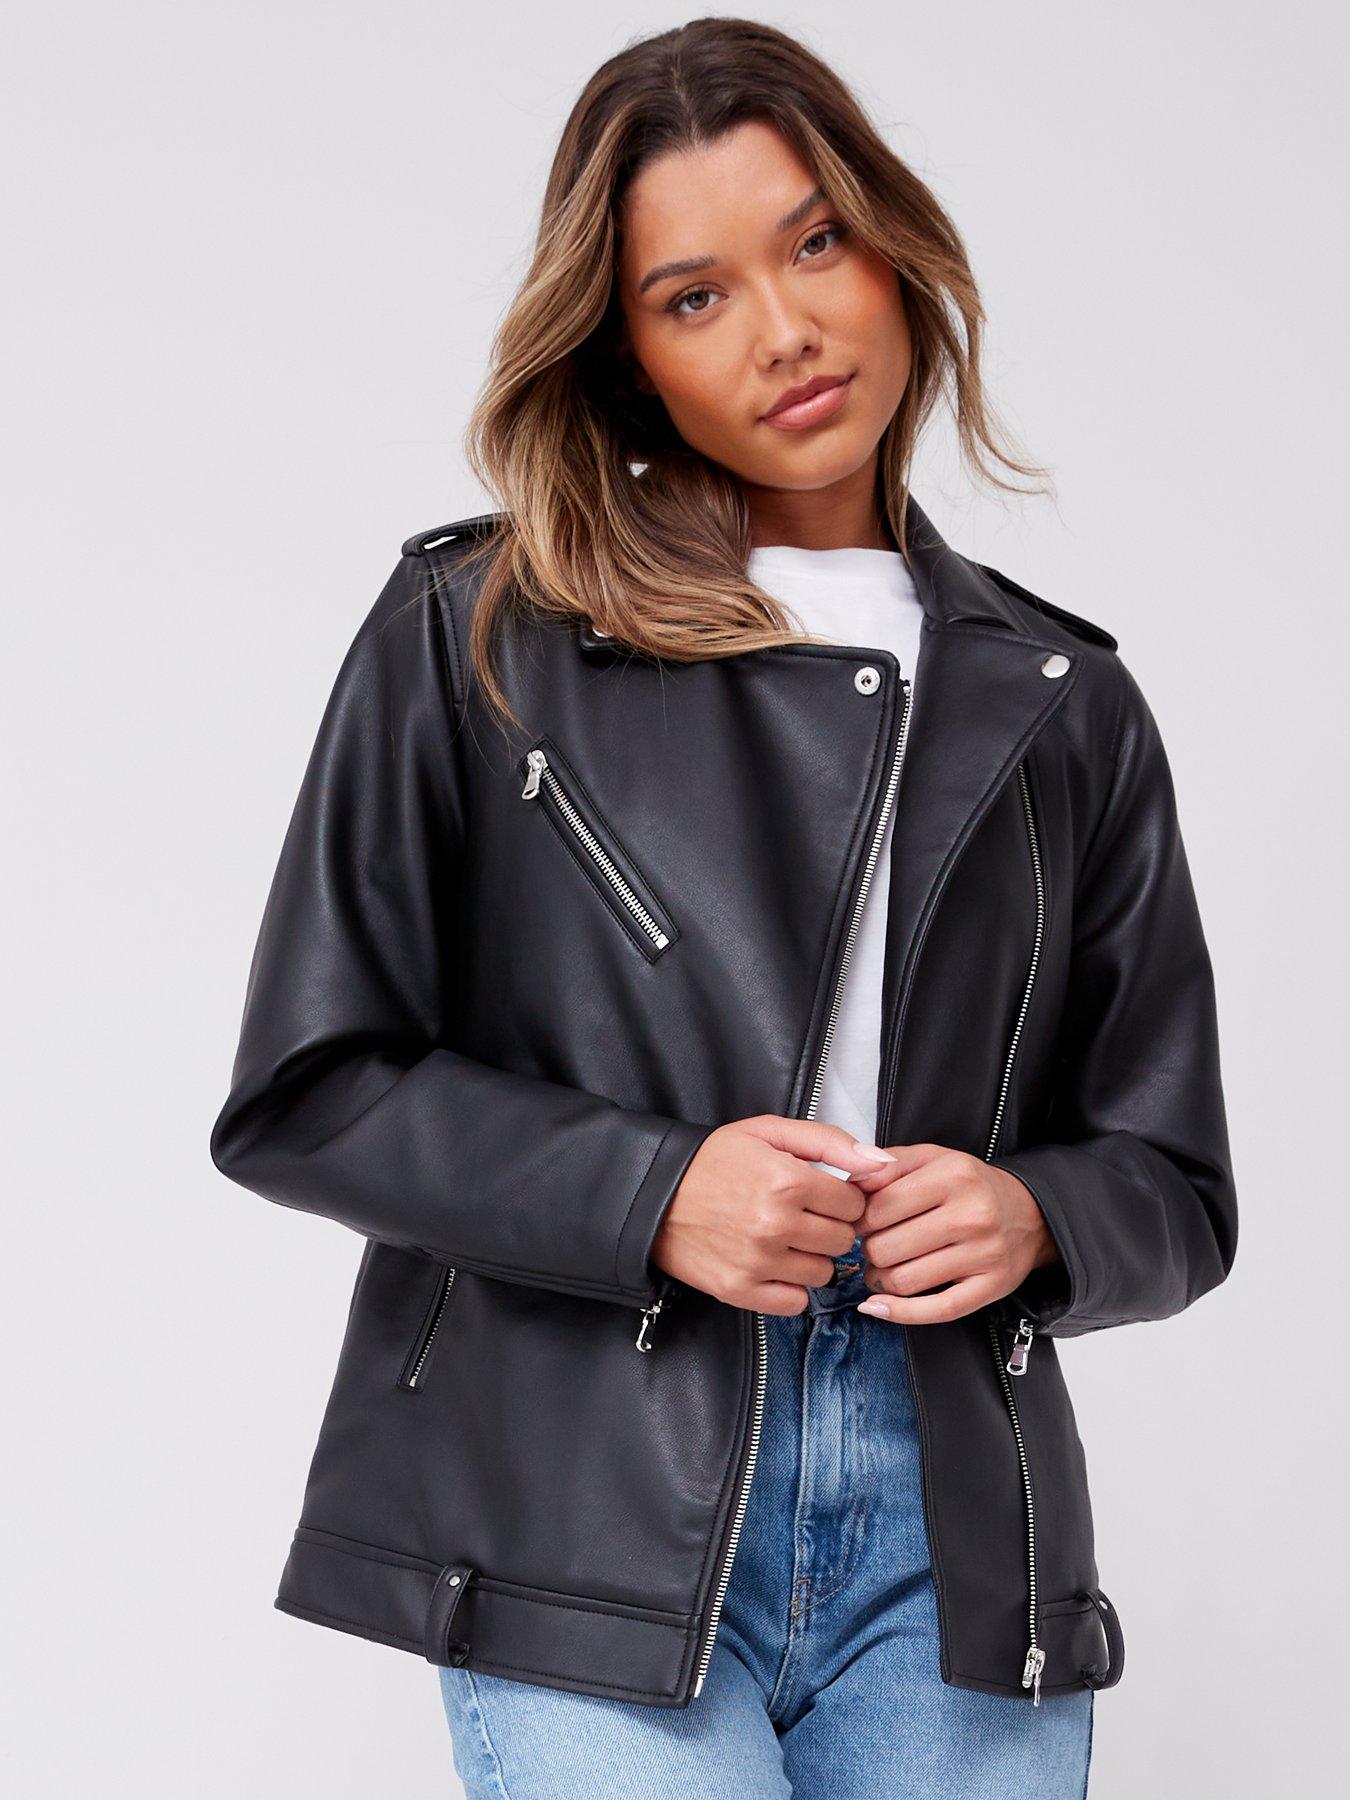 ASOS Premium Leather Biker Jacket With Floral Embroidery Black